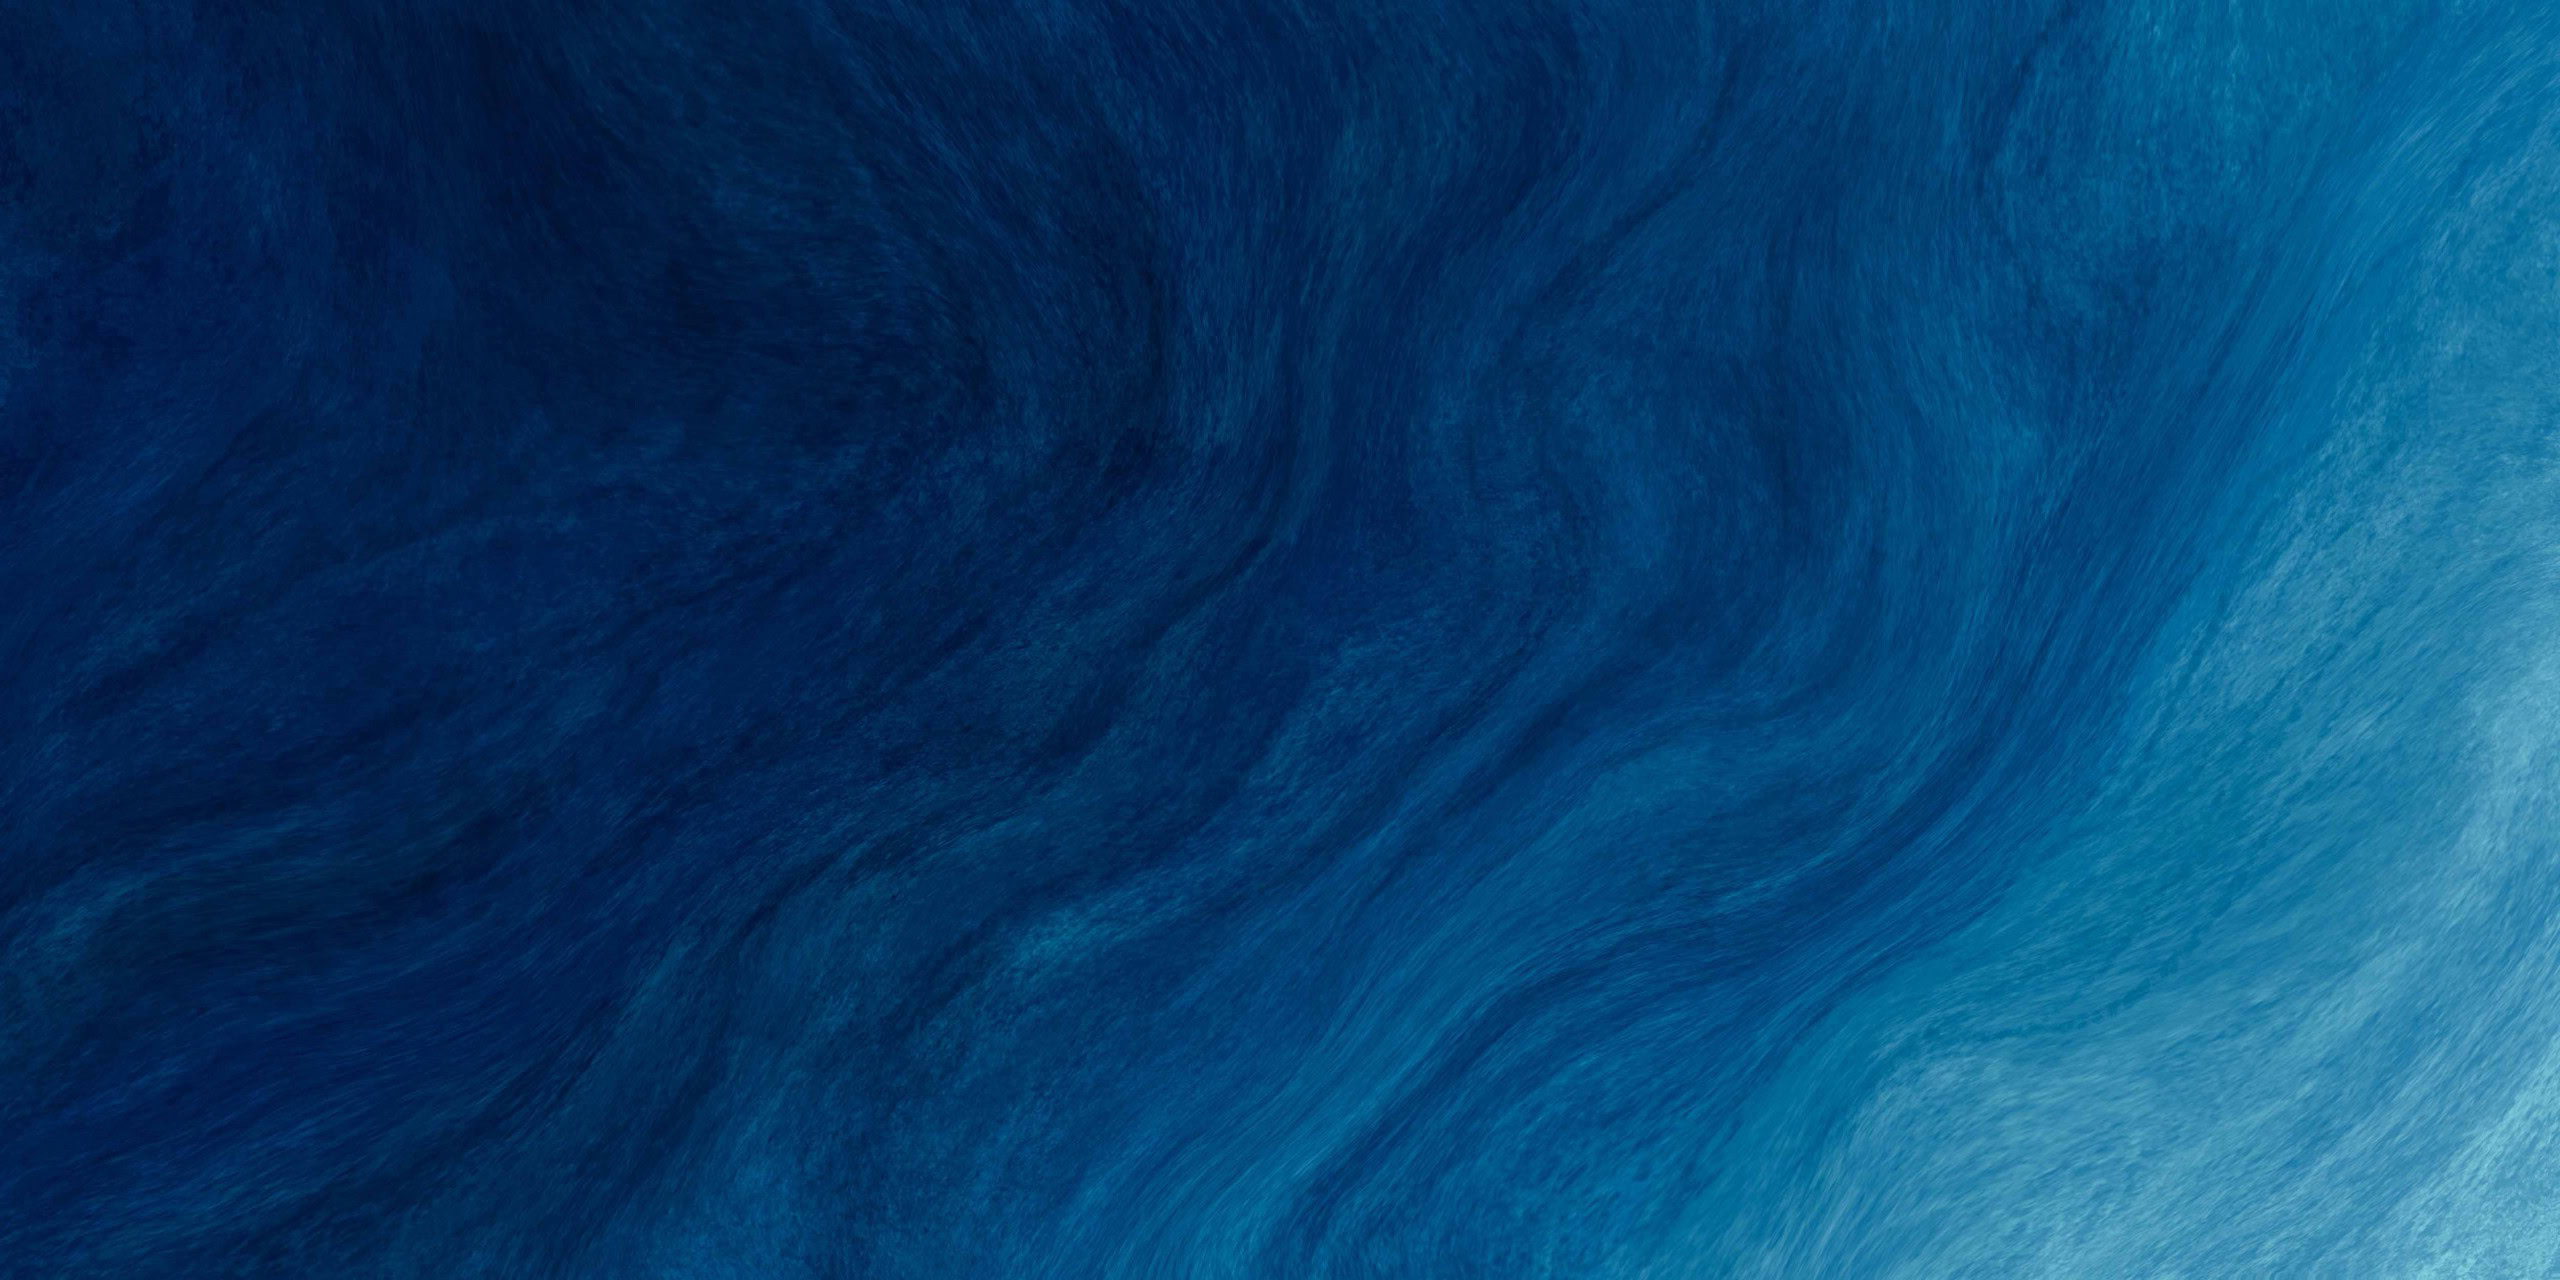 A background image features a gradient of blue tones, ranging from light blue at the bottom left corner to dark blue at the upper right. The texture resembles fluid, wavy strokes creating a sense of movement and depth, symbolizing the cohesive flow and synergy of a strong team.